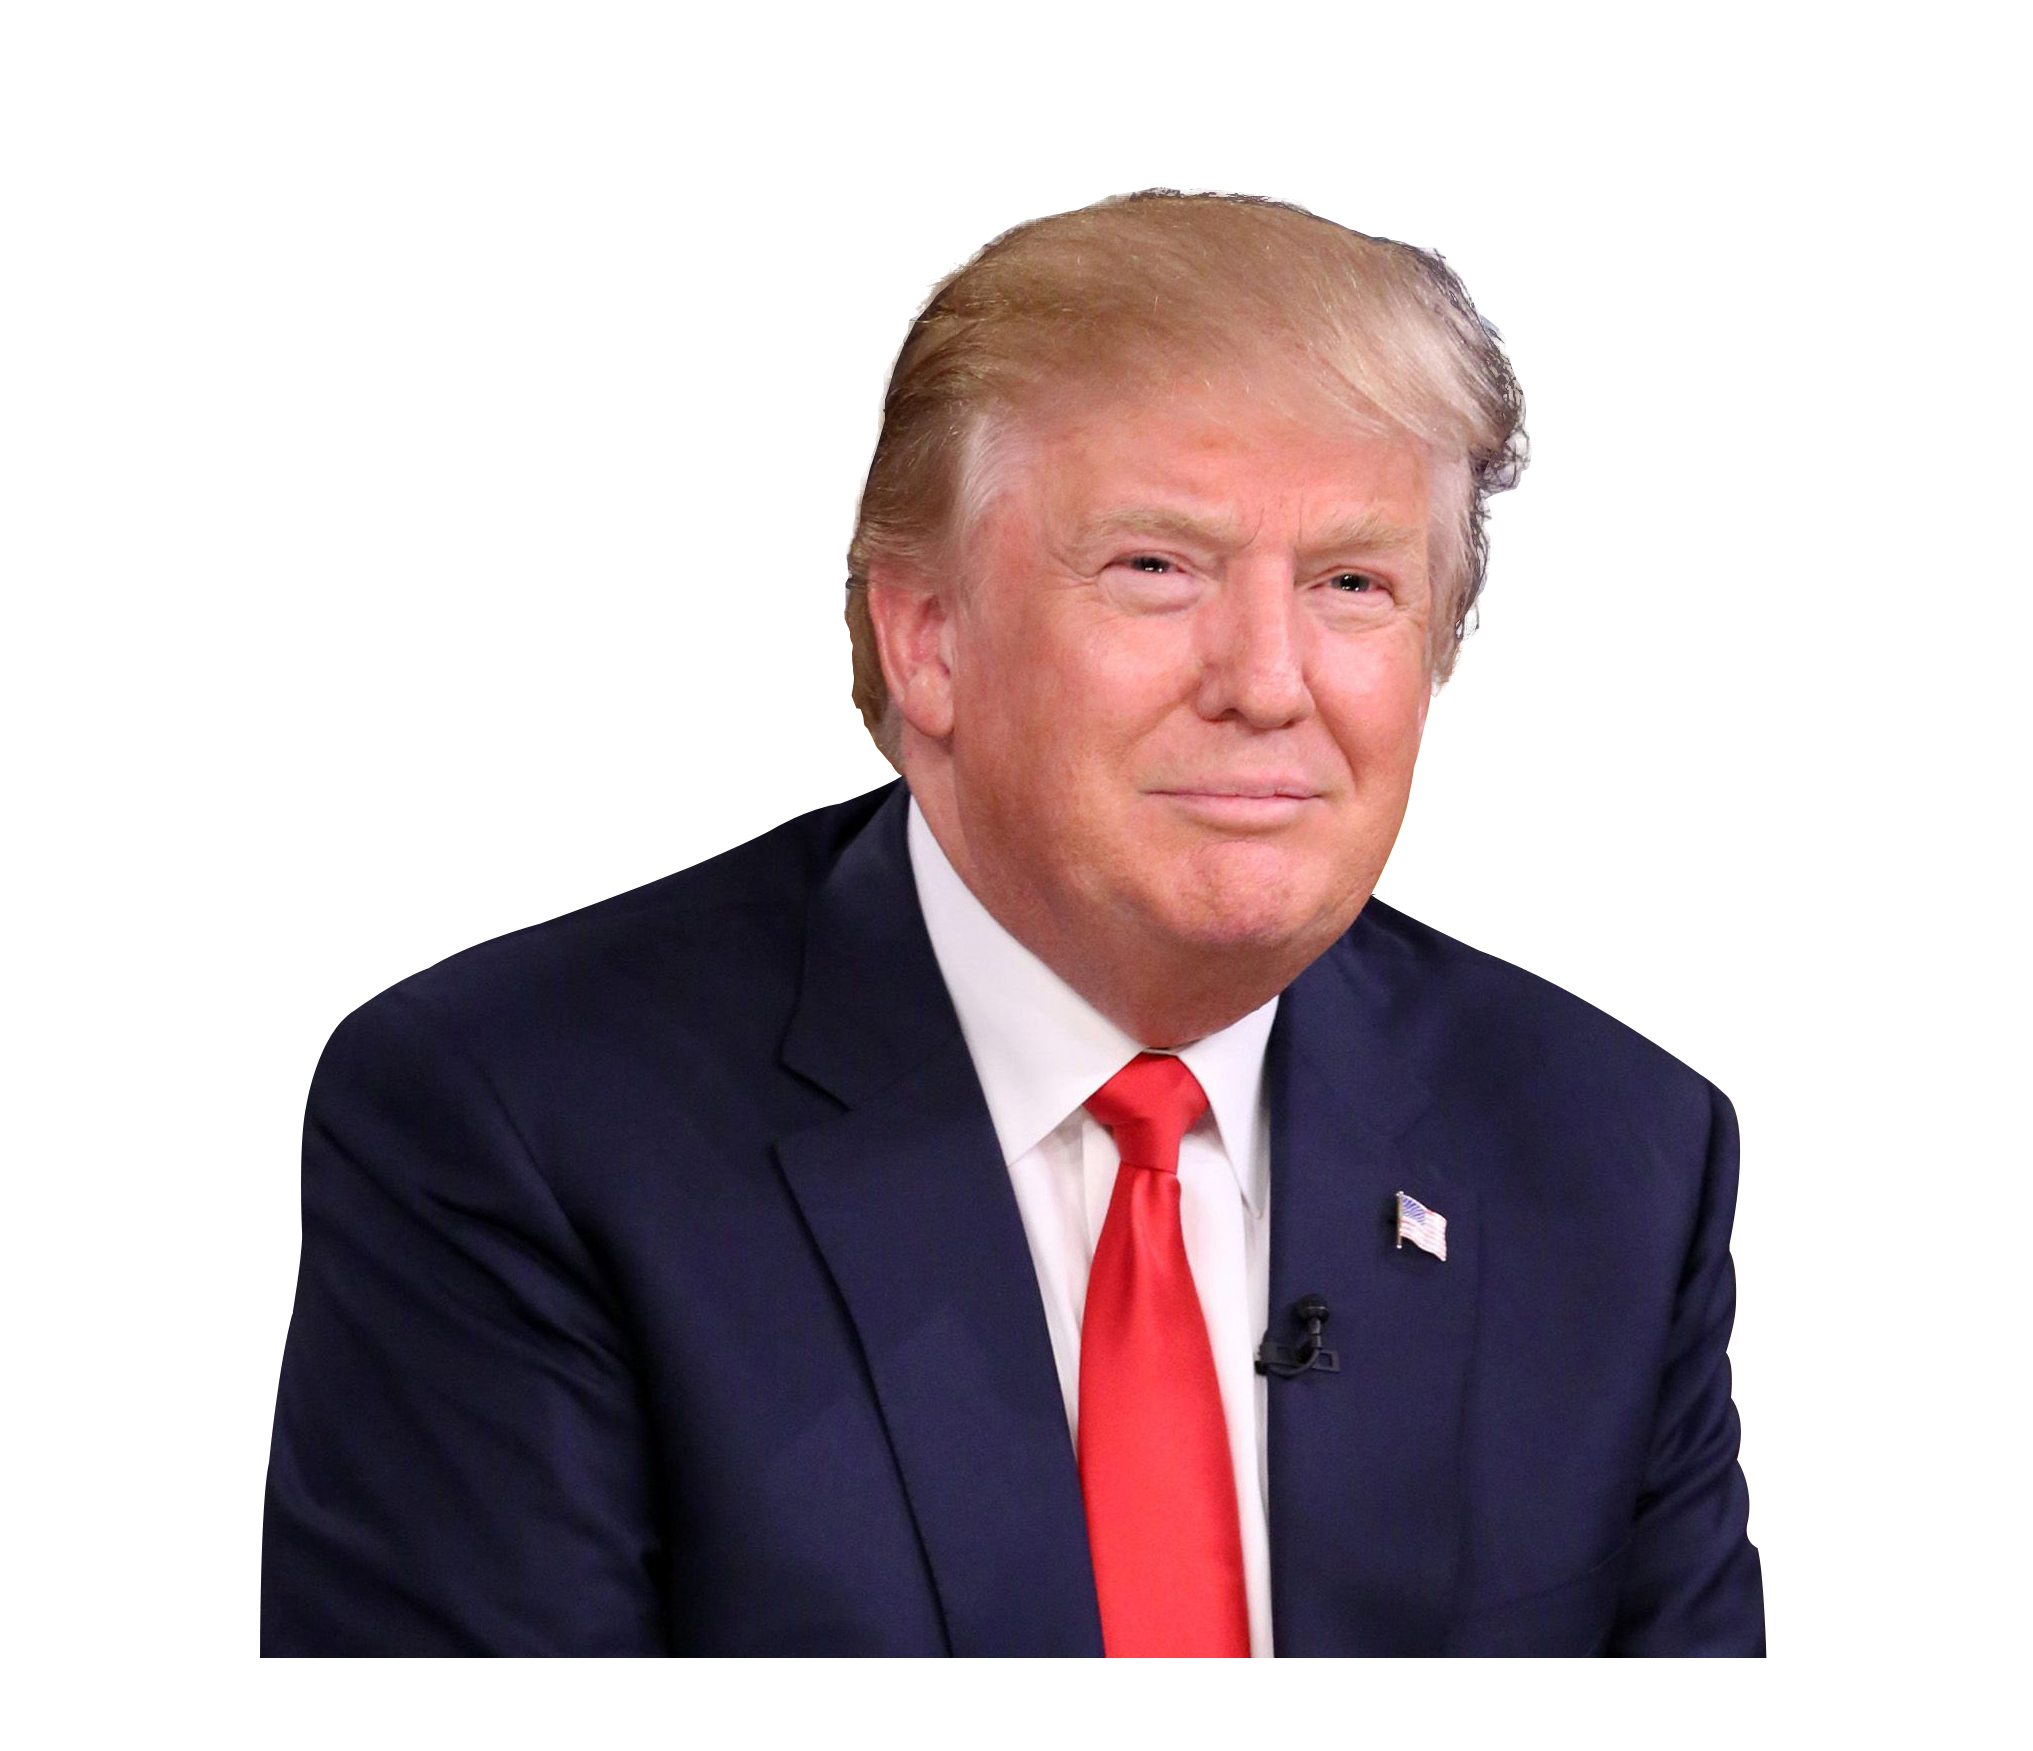 Donald Trump United States President PNG Image in High Definition pngteam.com